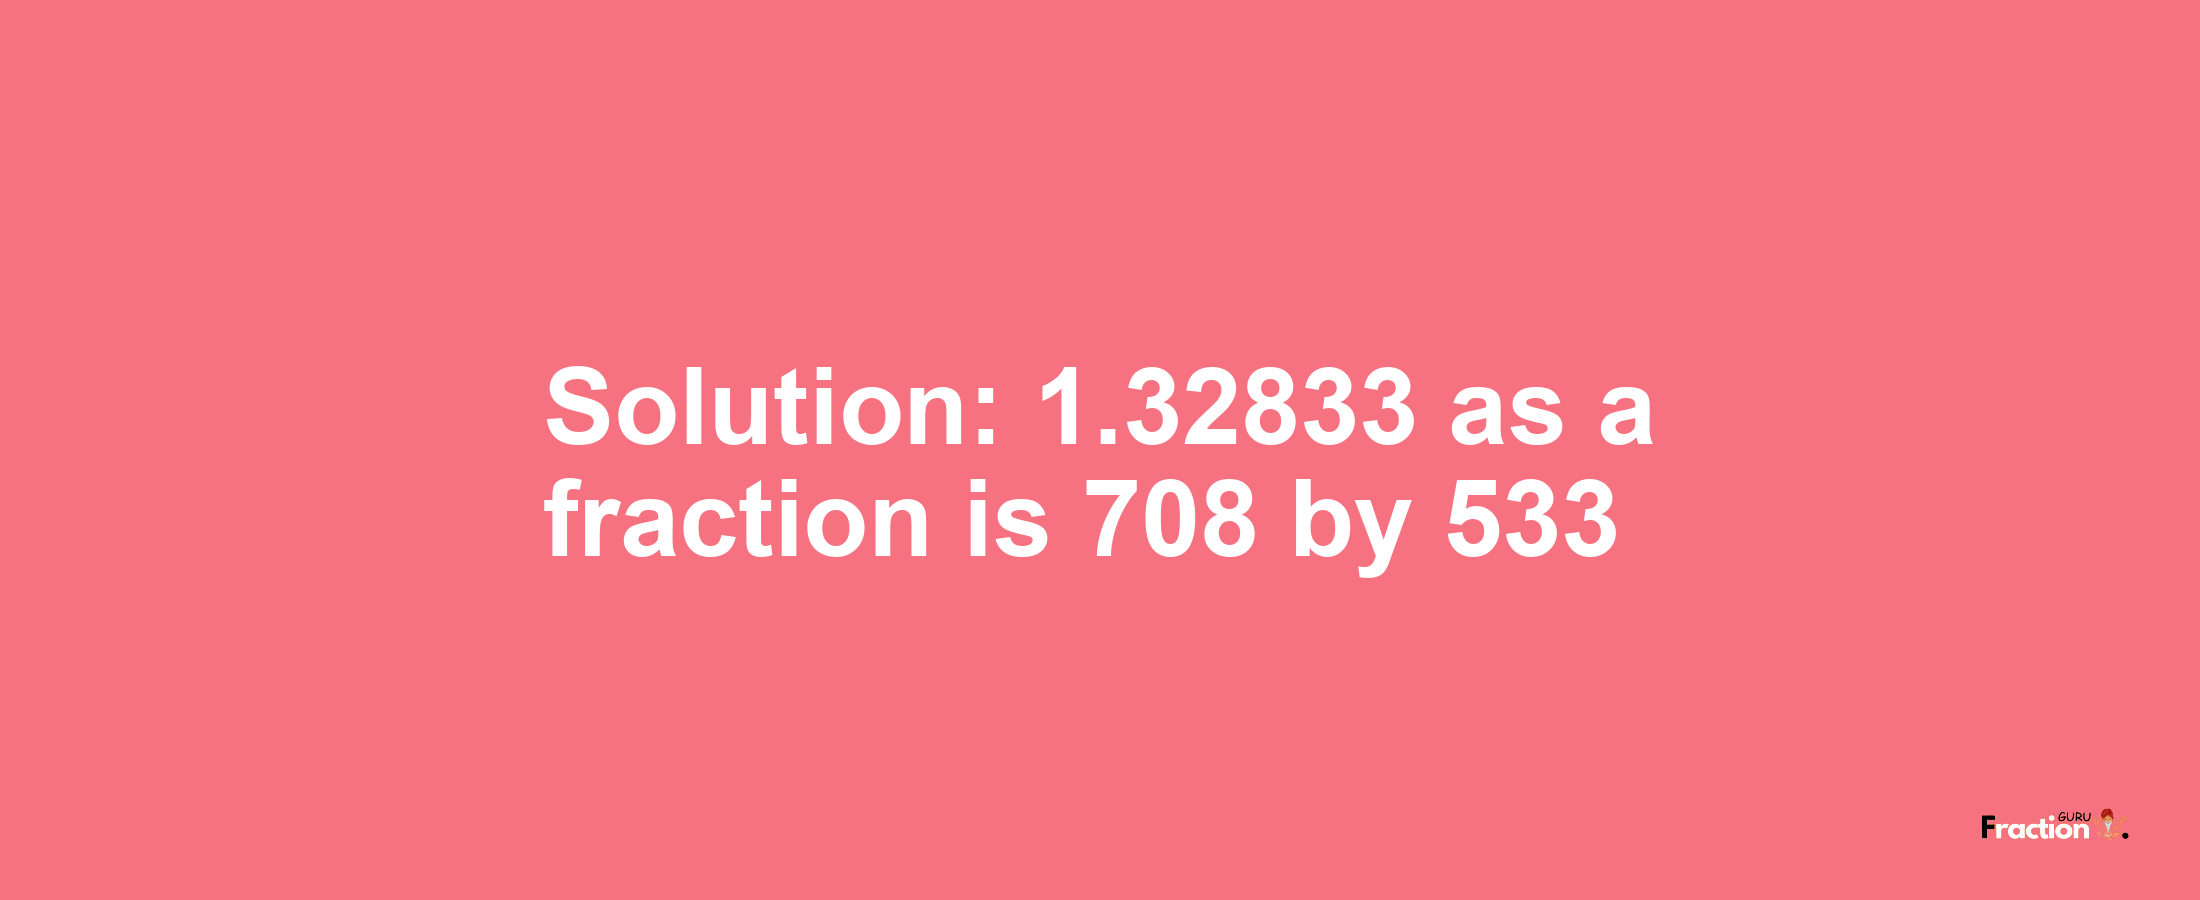 Solution:1.32833 as a fraction is 708/533